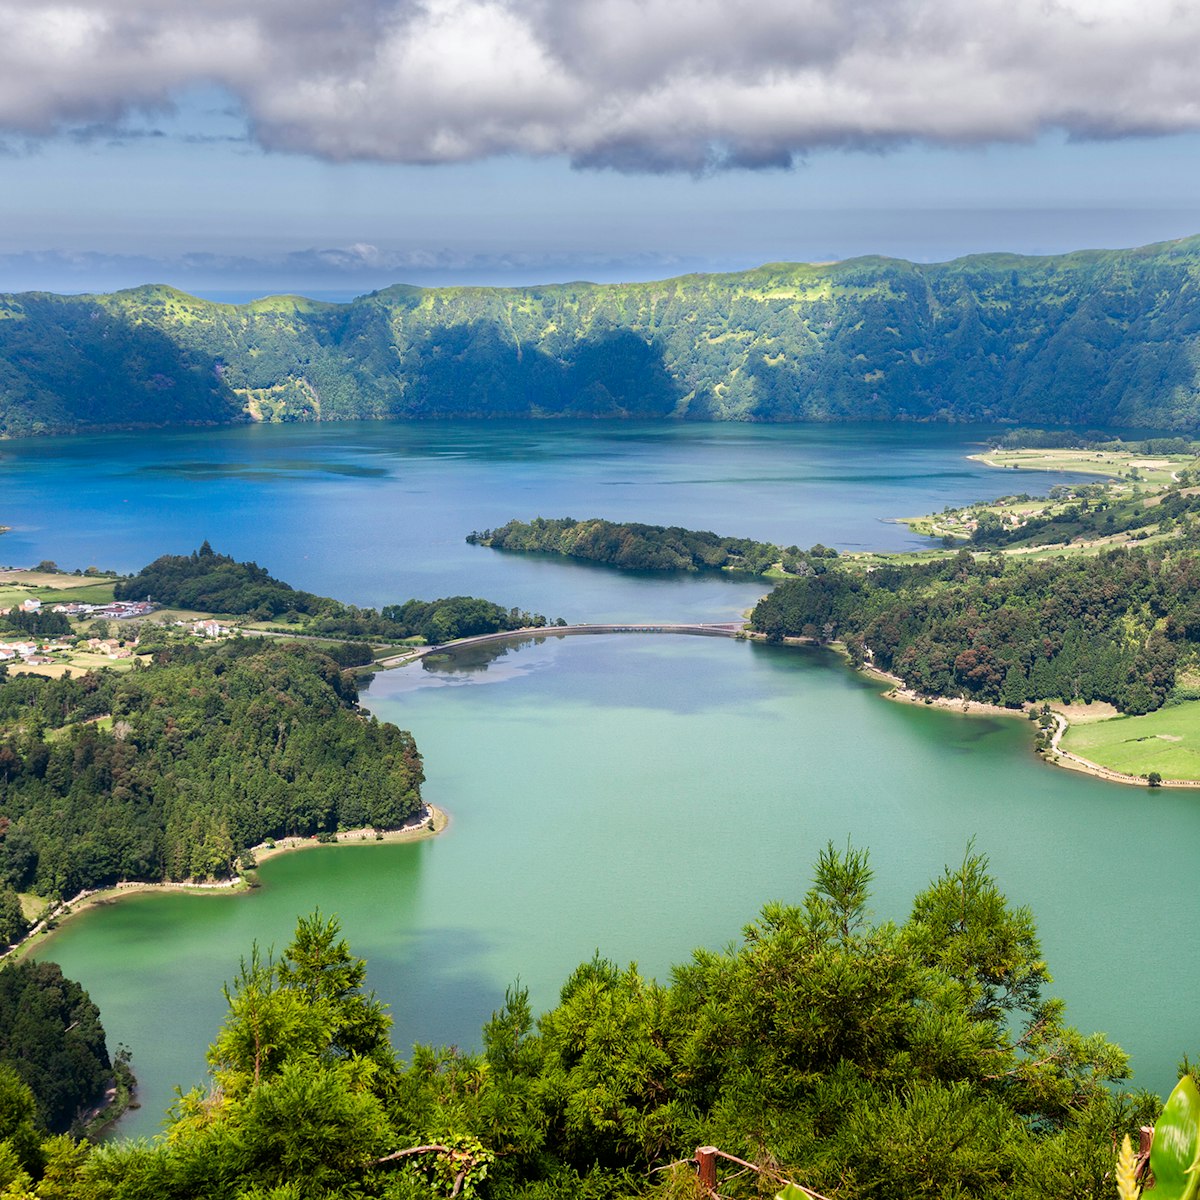 Lake of Sete Cidades from Vista do Rei viewpoint in Sao Miguel, Azores; Shutterstock ID 333806120; Your name (First / Last): James Kay; GL account no.: 65050; Netsuite department name: Online Editorial; Full Product or Project name including edition: Azores destination page highlights